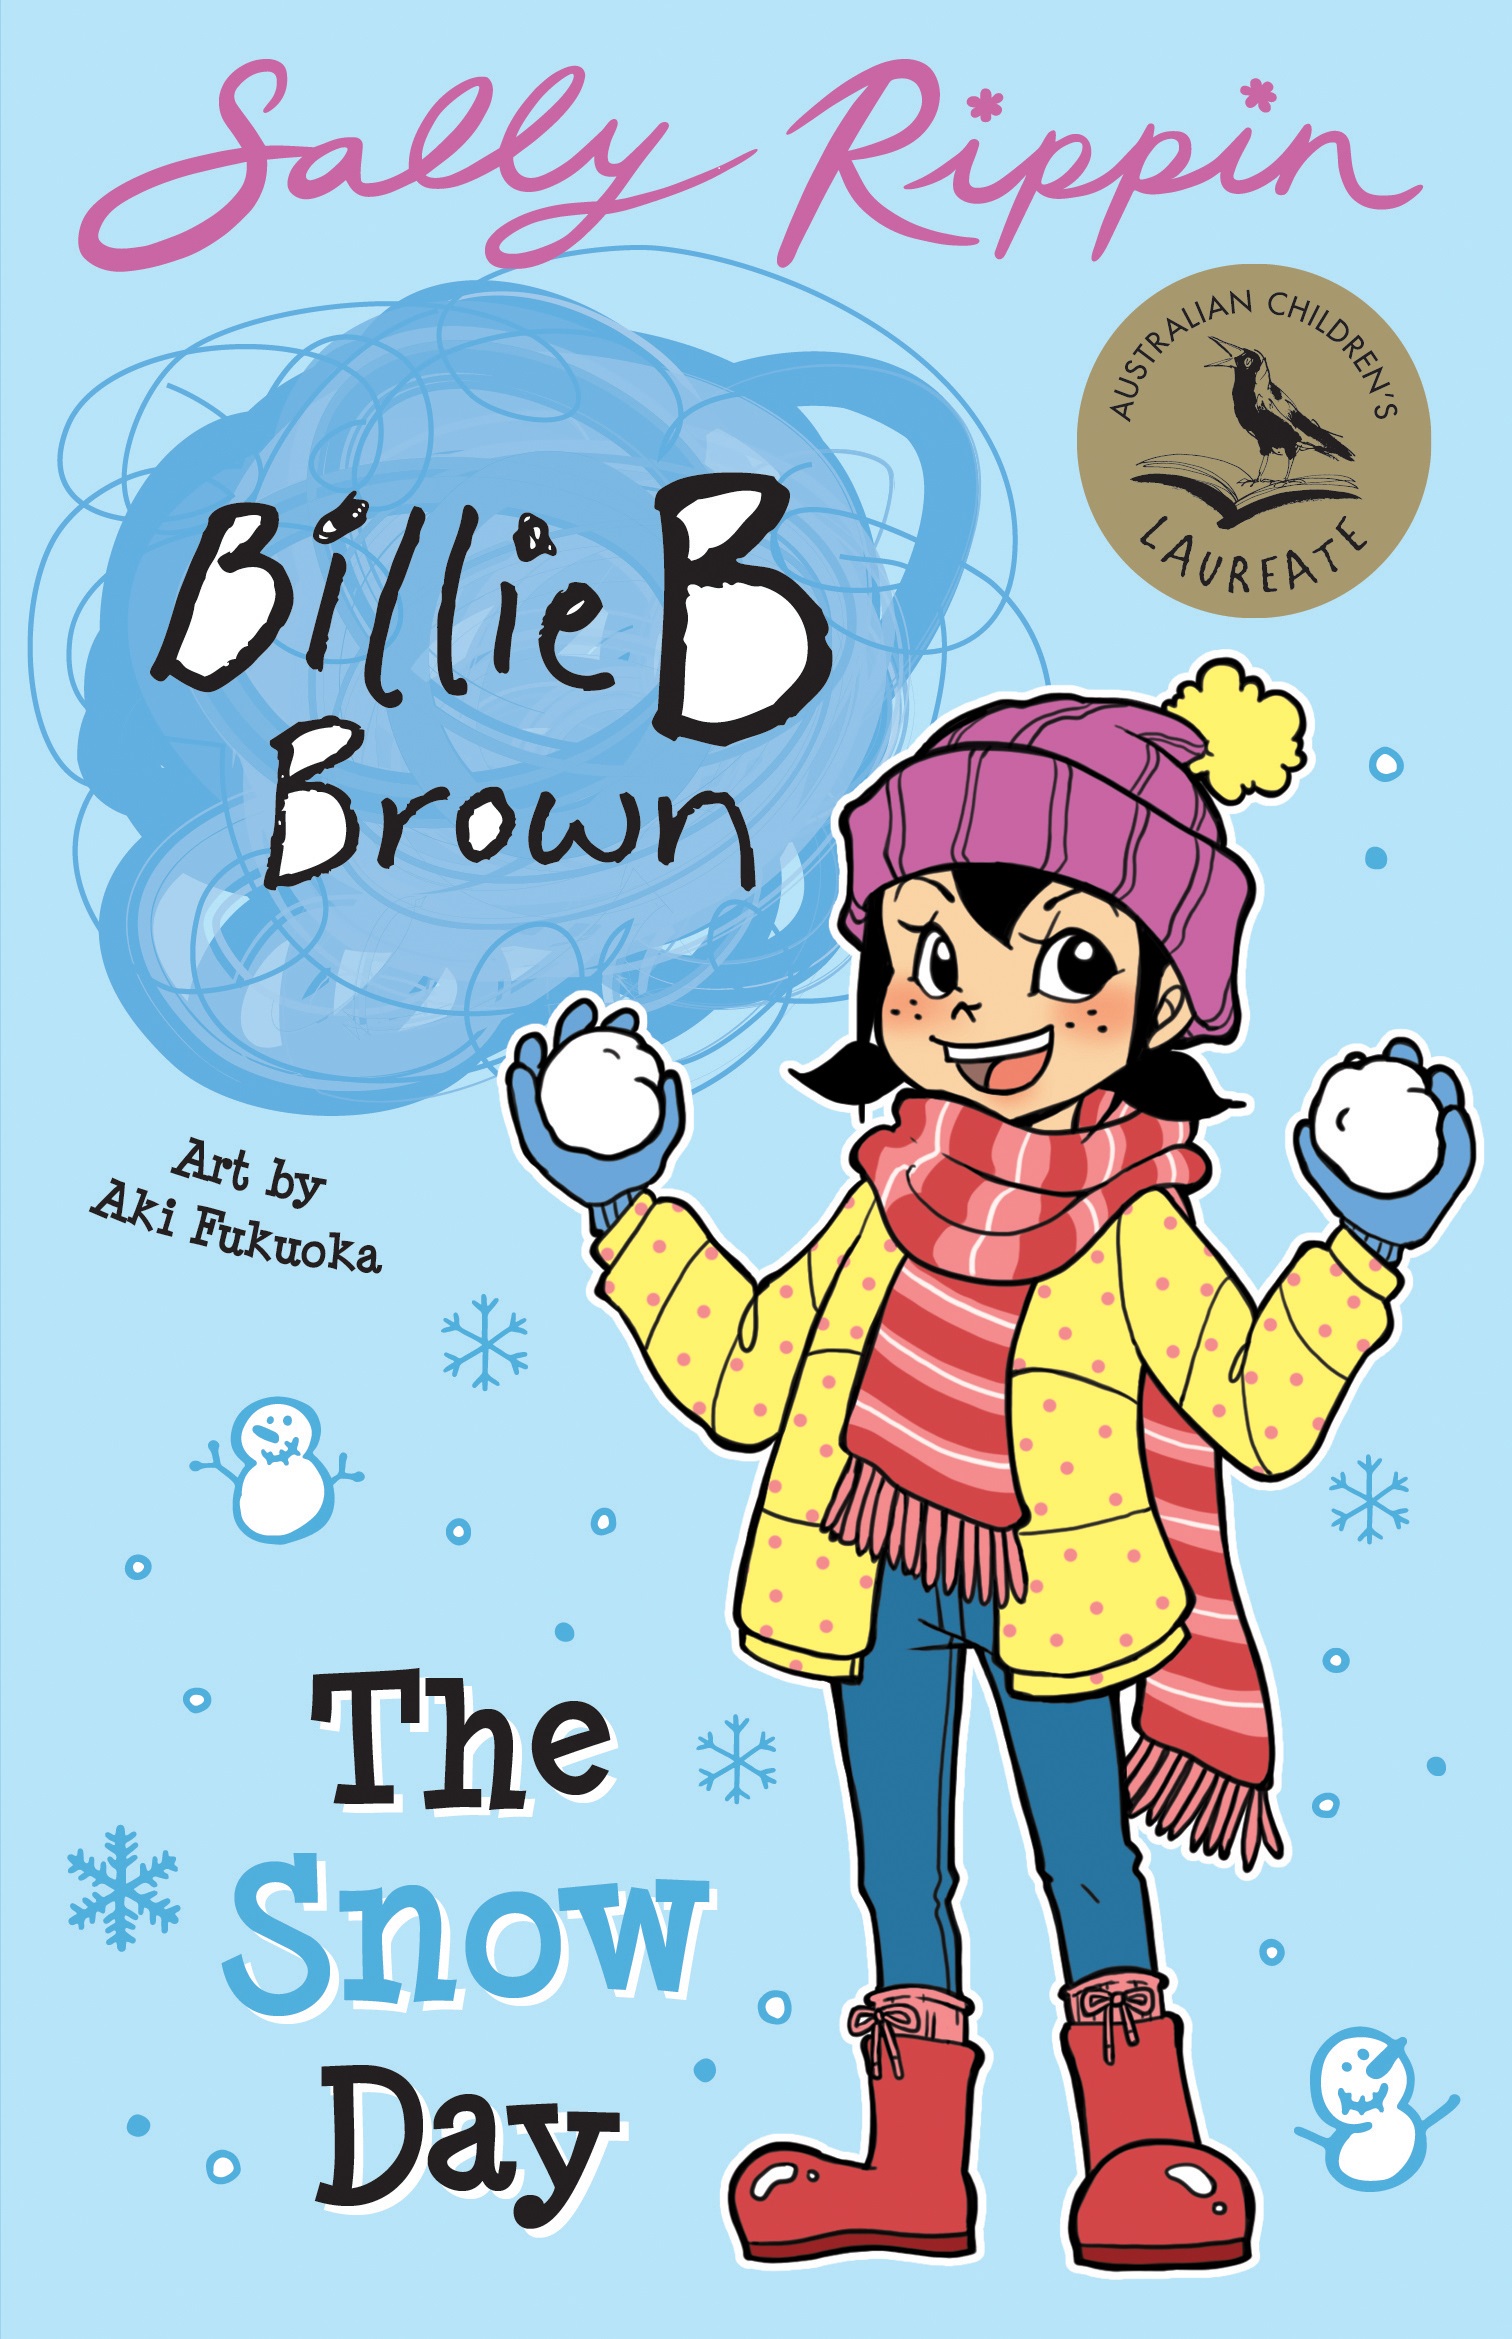 A children's book cover showing an illustration of a young girl with dark hair wearing winter gear and holding two snowballs